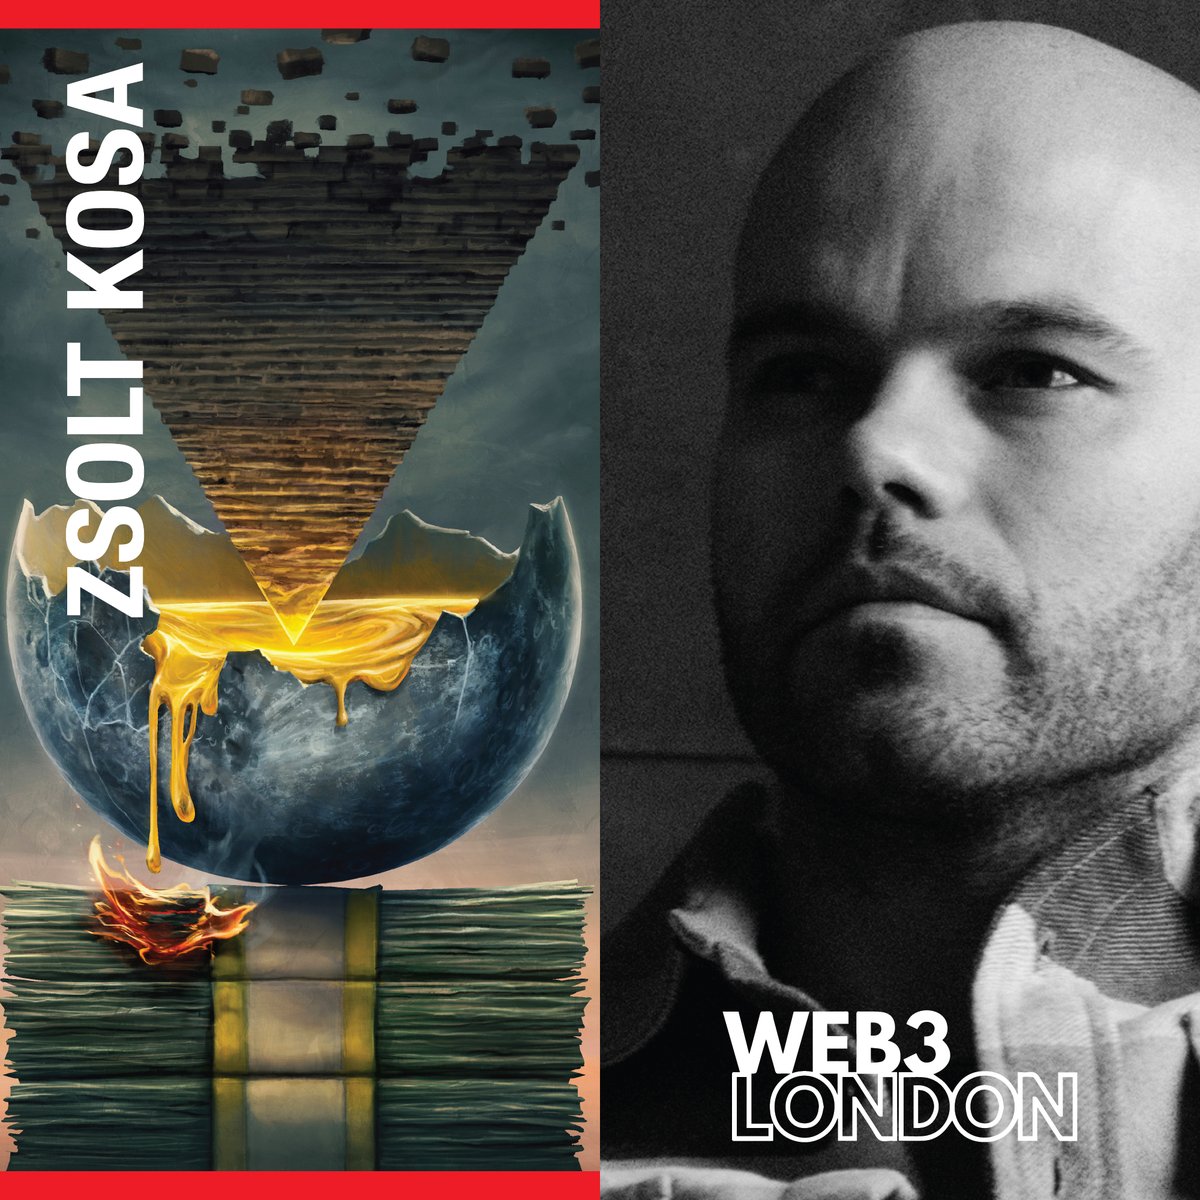 🥂Meet our artist for the coming Web3London event this May 8th ✨ Get ready to be transported into the digital realm with Zsolt Kosa's mesmerizing artwork! From geometric portraits to abstract wonders, Zsolt's creations are sure to captivate you at #Web3London. @Zsoltkosa